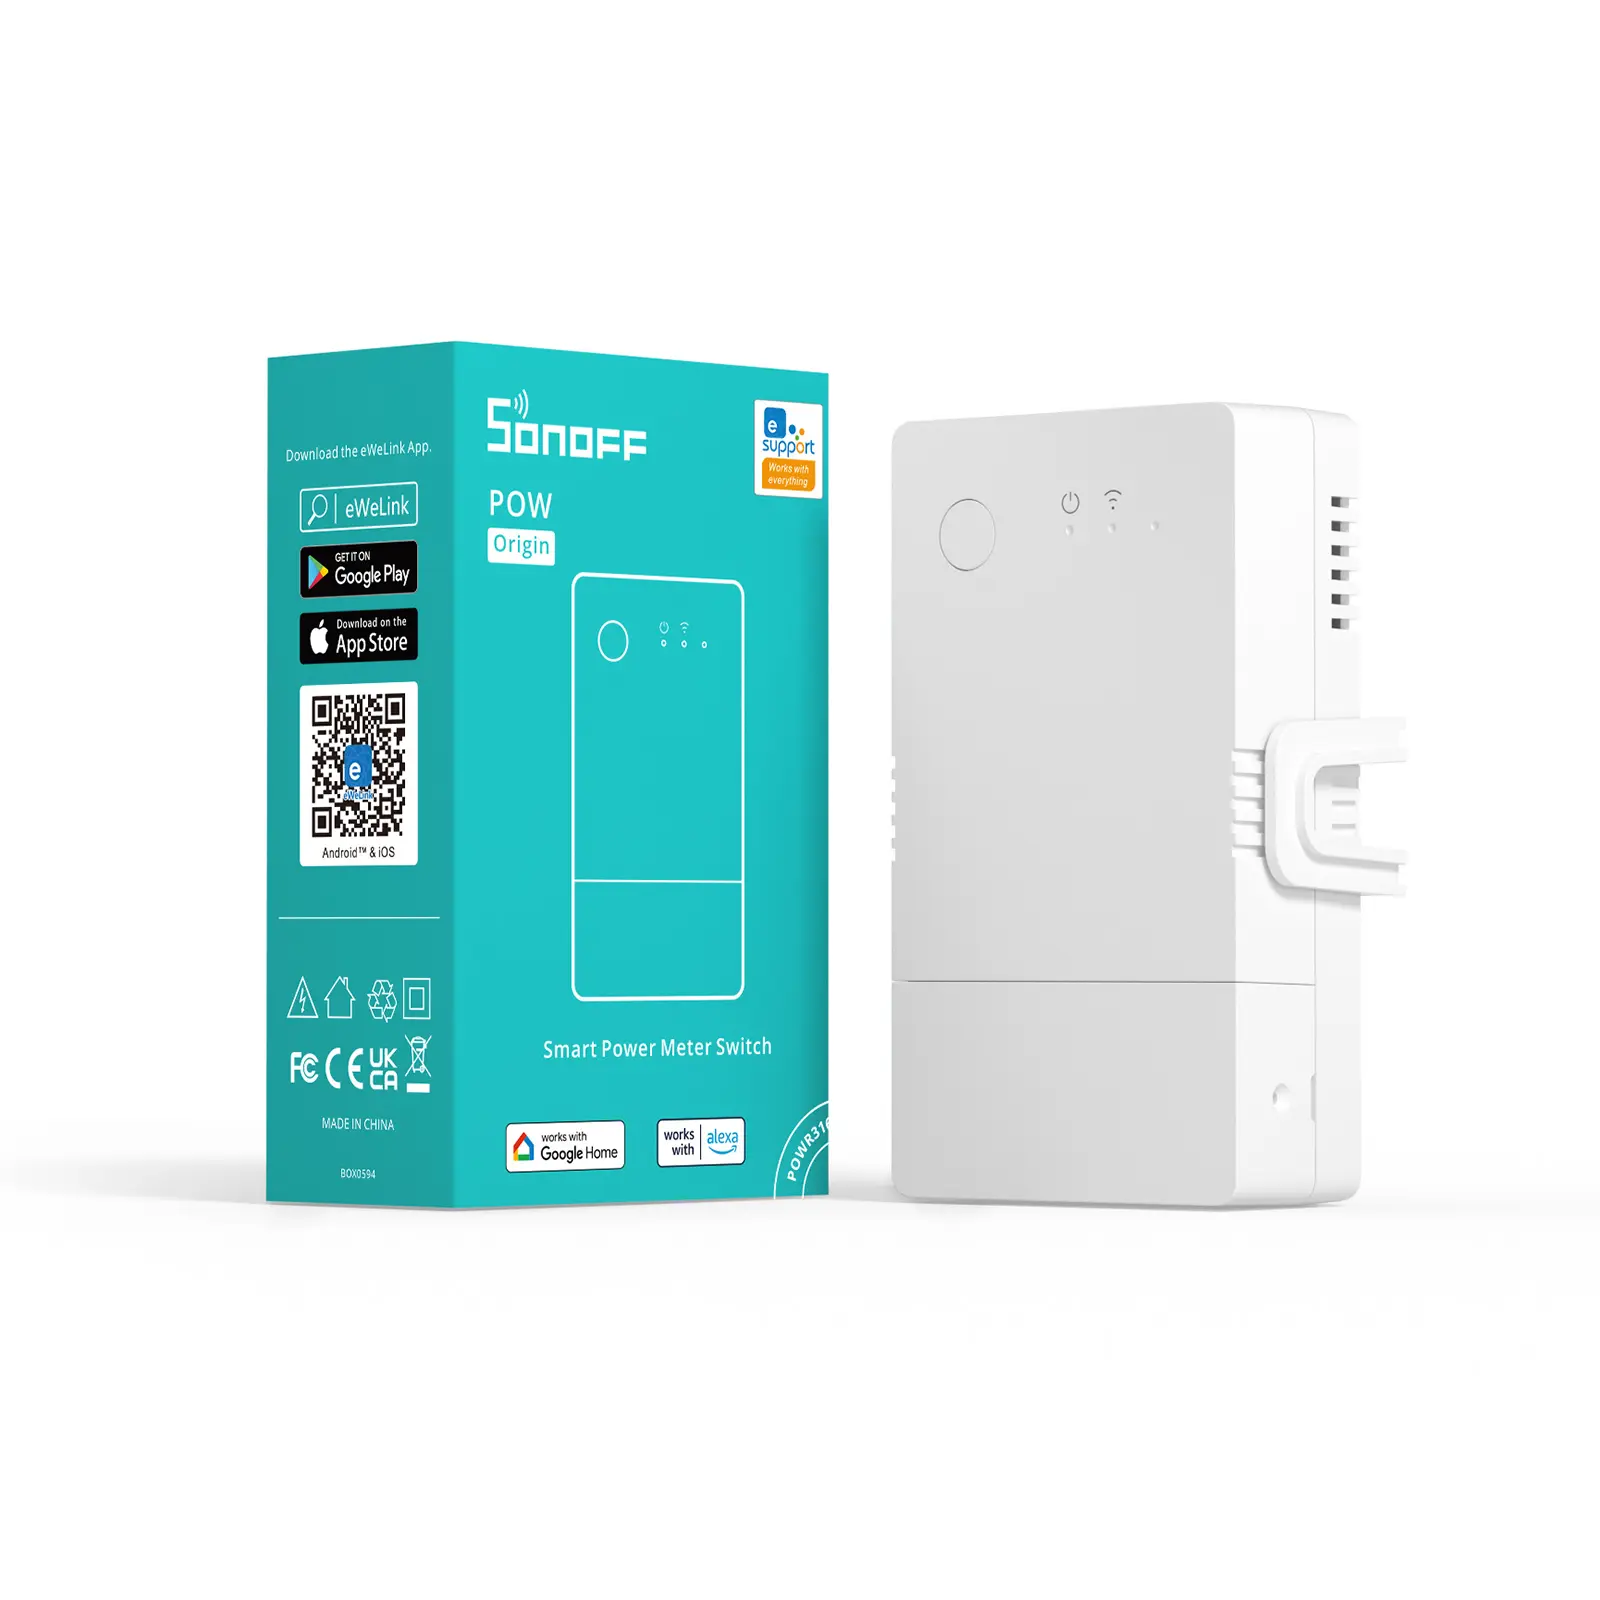 SONOFF POW Origin 16A Wifi Smart Voice Remote Control Switch Module Monitor Power Consumption Works With Alexa Google Home